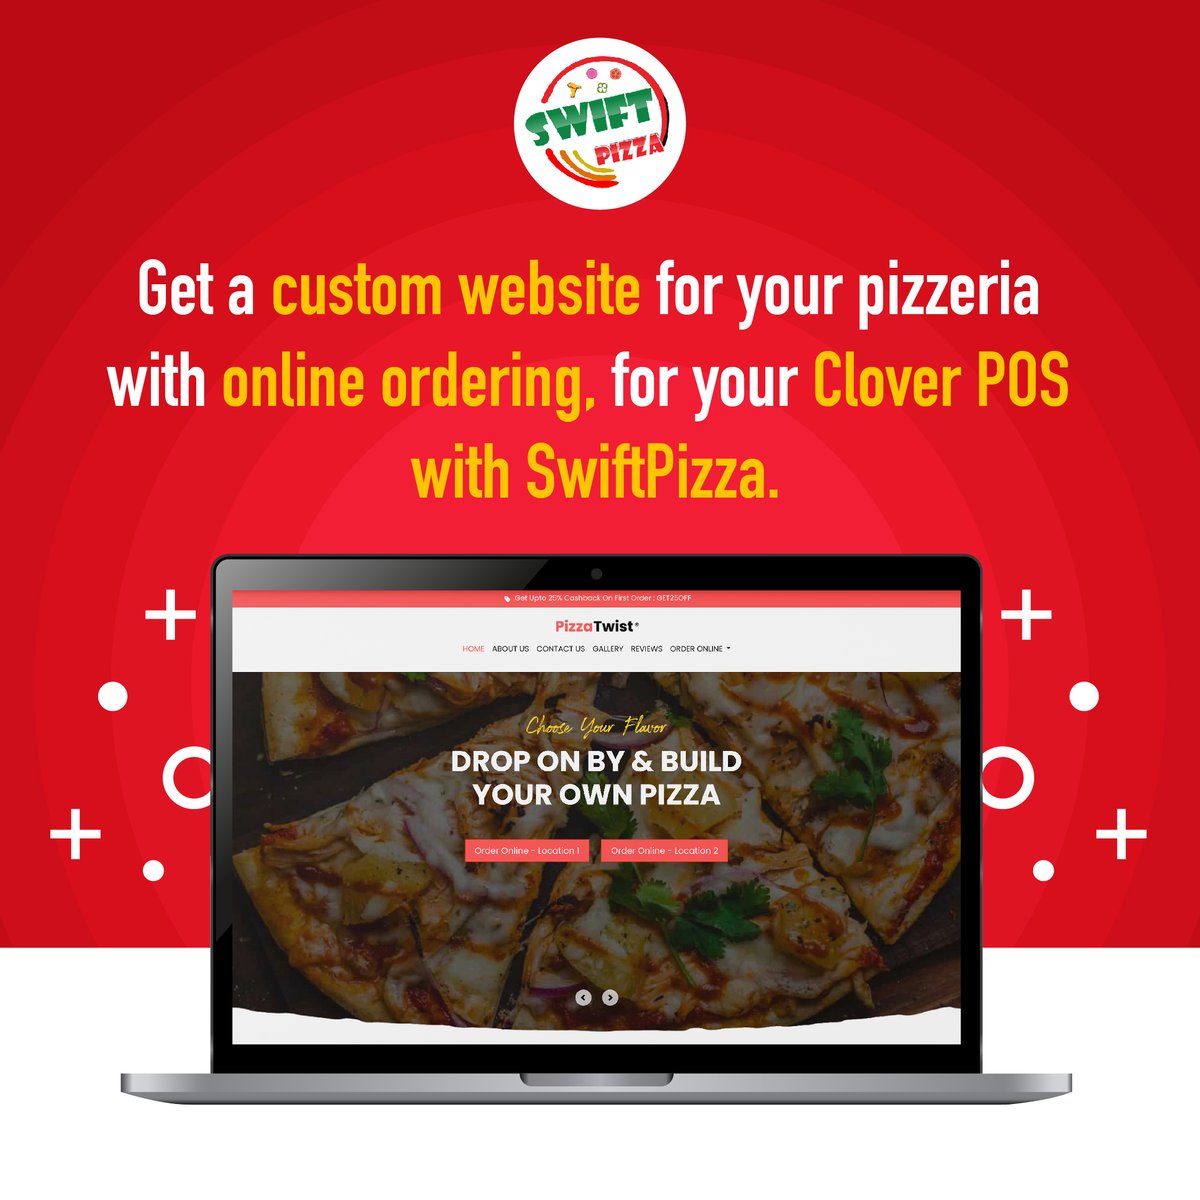 The ultimate solution for your business: Get a Customized Website with Integrated POS exclusively designed for pizzerias! 📷
Book your free demo: get.swiftpizza.com
#swiftpizza #onlineordering #PizzaPerfection #onlineordering #onlineorderingsystem
#customwebsite